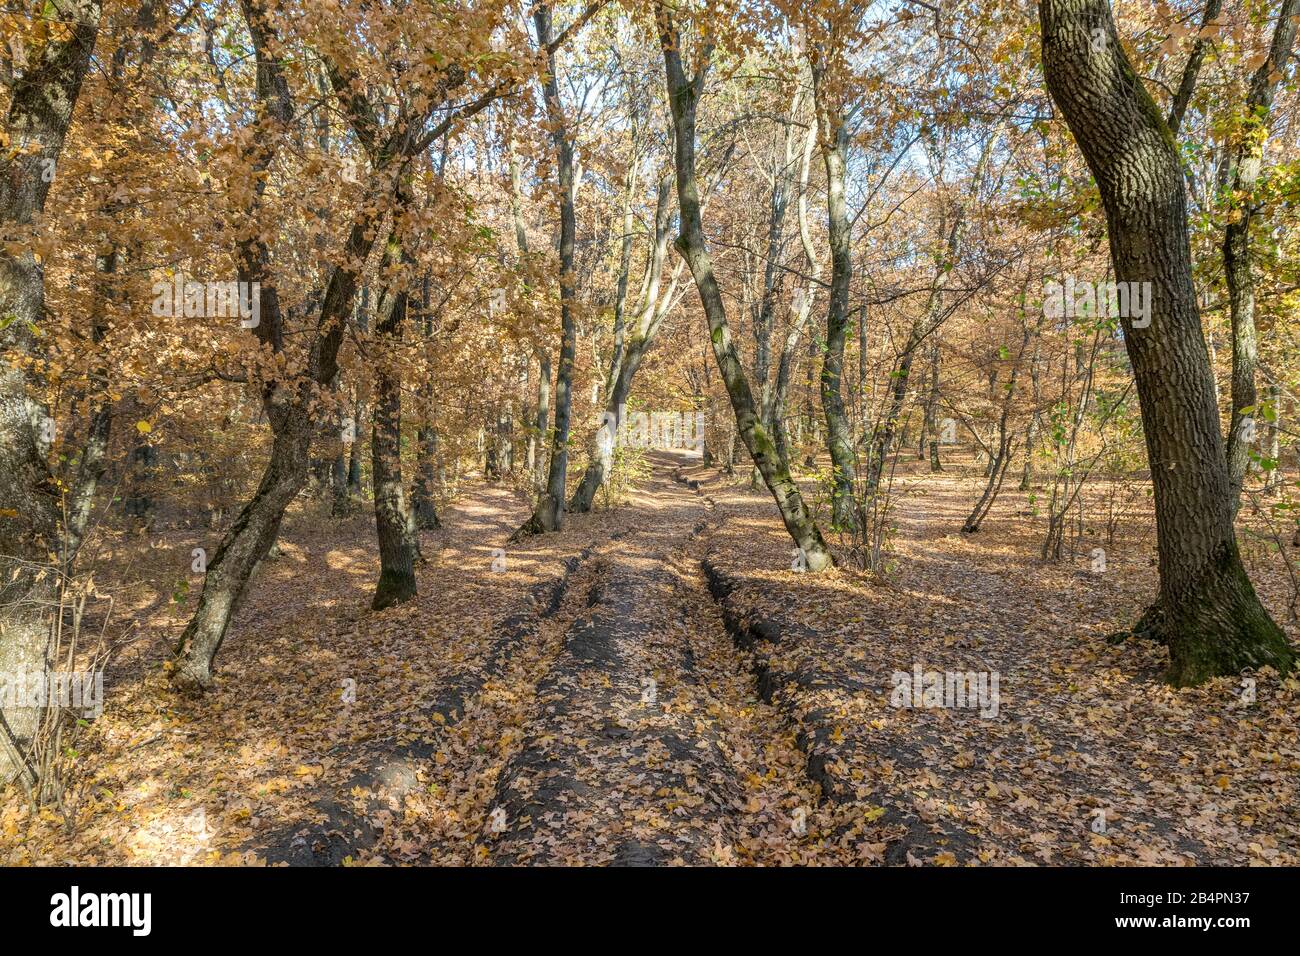 Hoia Baciu Forest - World’s Most Haunted Forest with a reputation for many intense paranormal activity and unexplained events. Inside Hoia Baciu Haunt Stock Photo